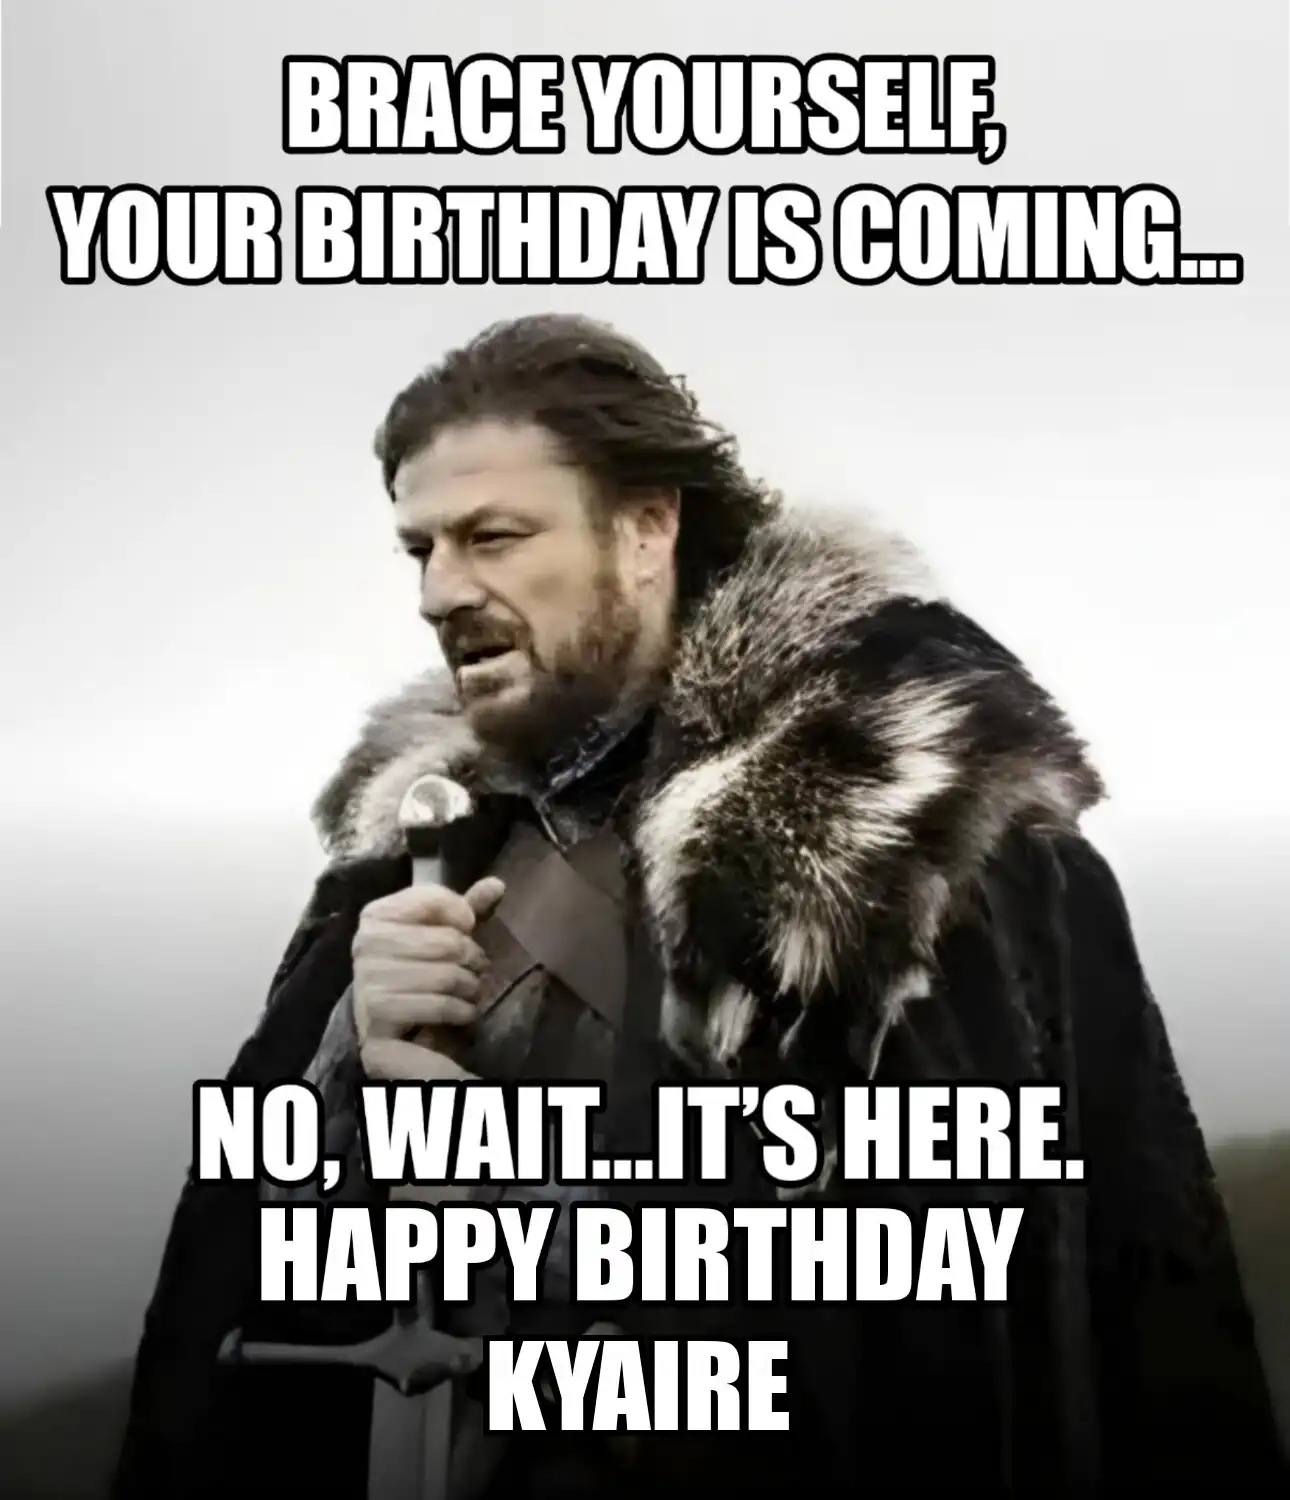 Happy Birthday Kyaire Brace Yourself Your Birthday Is Coming Meme